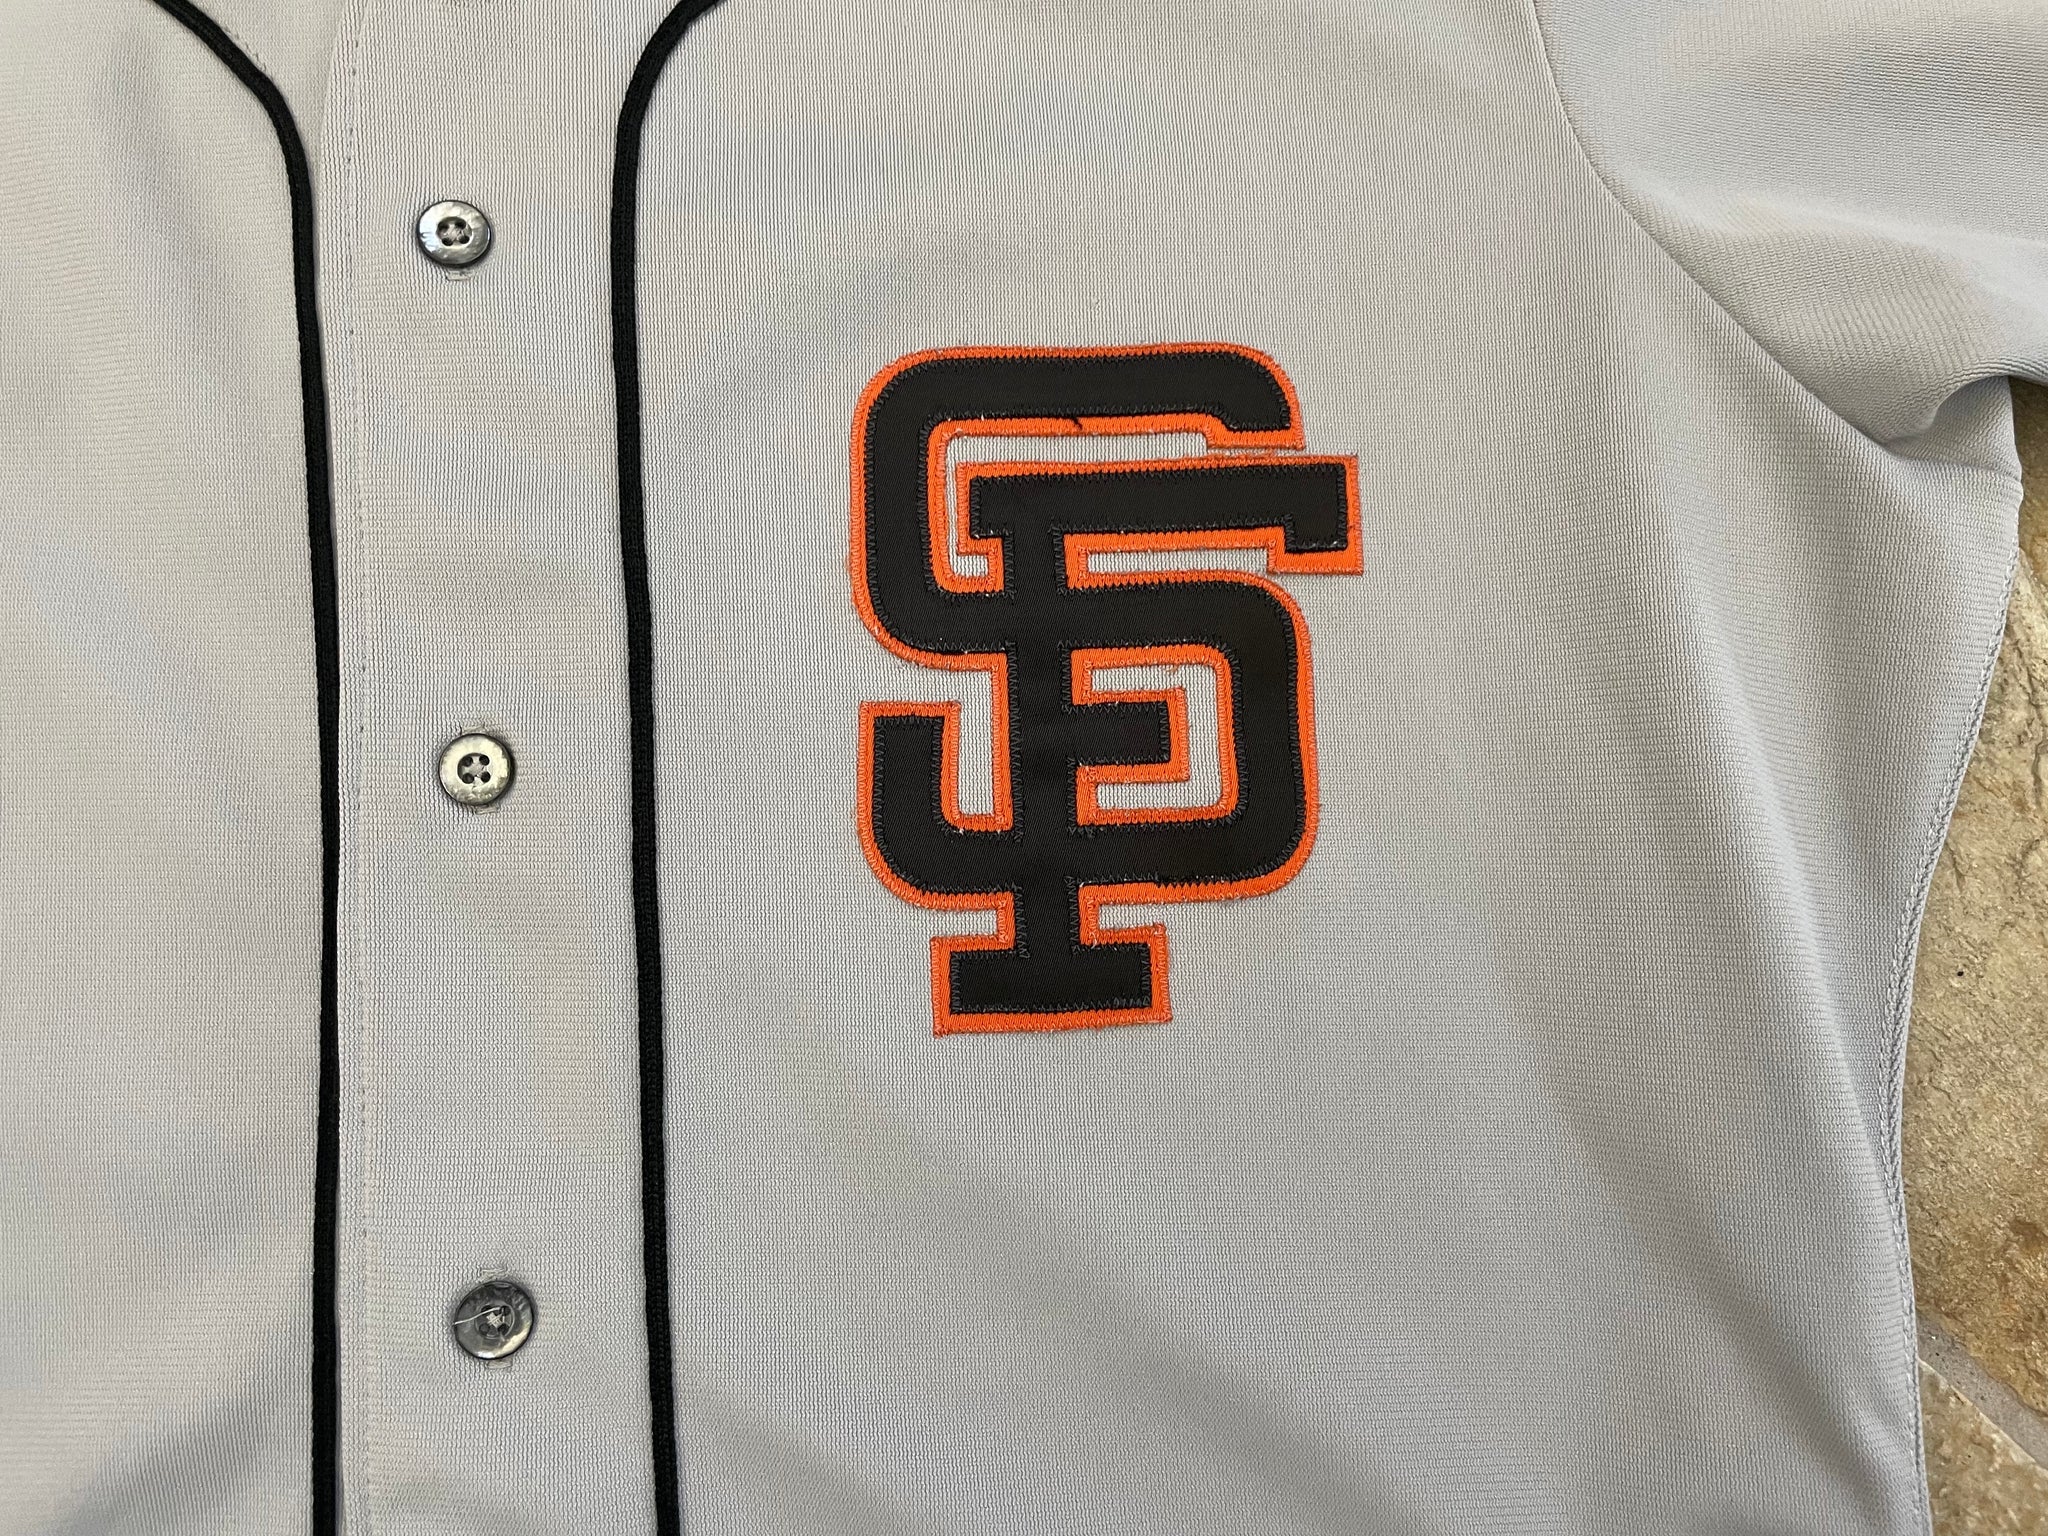 Vintage San Francisco Giants Rawlings Baseball Jersey, Size 48, XL – Stuck  In The 90s Sports